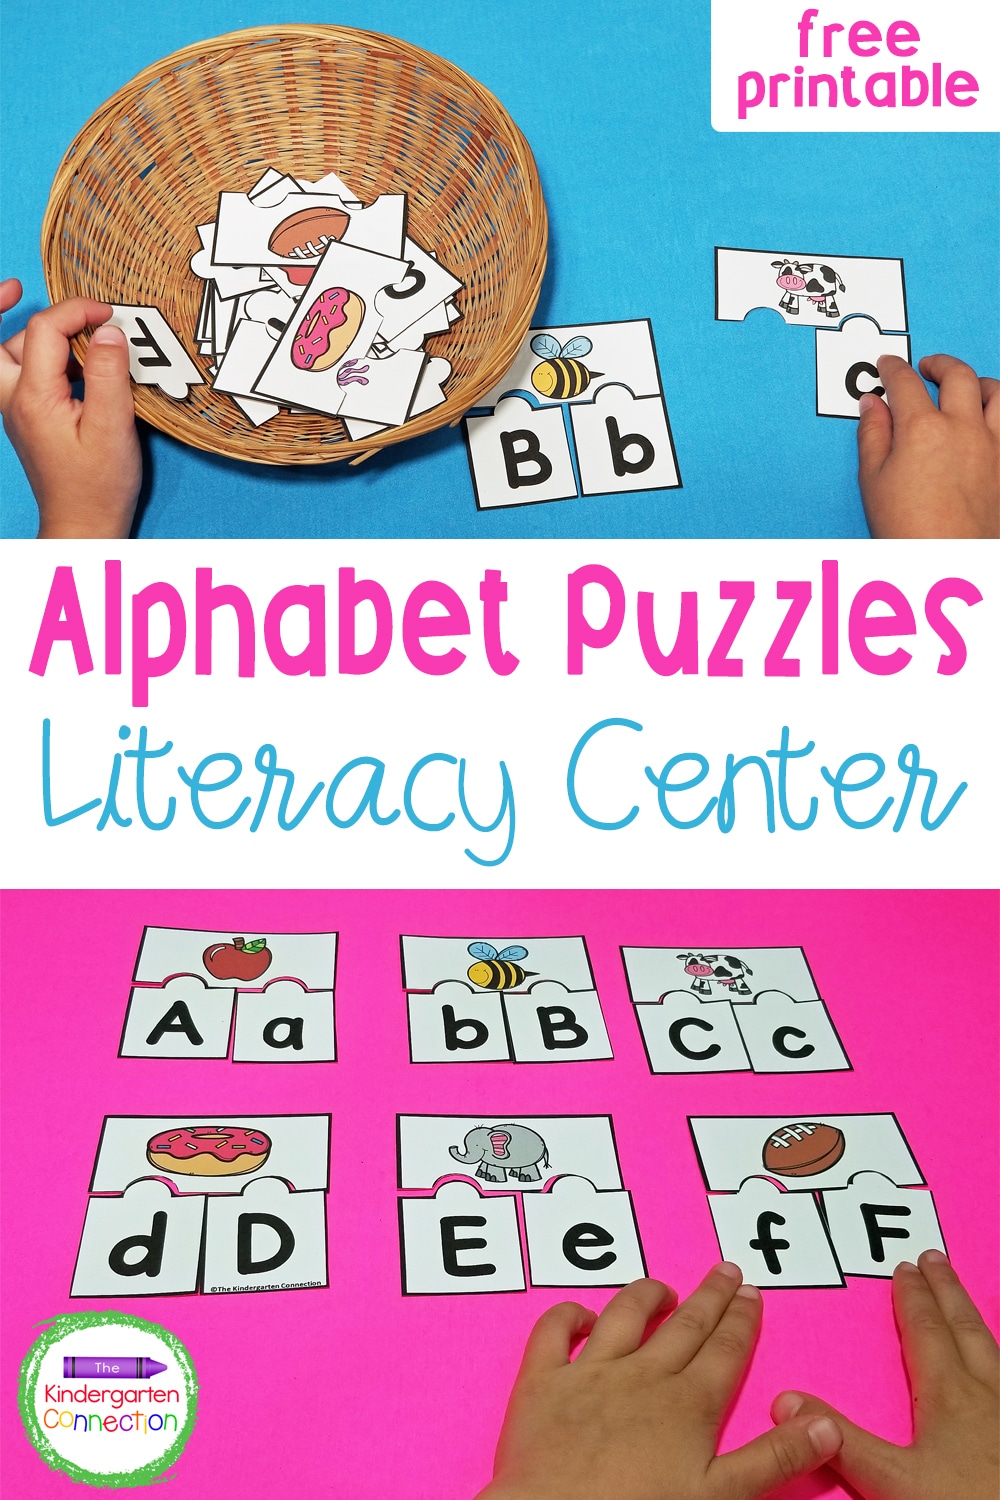 These free ABC Puzzles are a perfect literacy center for Pre-K and Kindergarten students who are learning their letters and sounds!